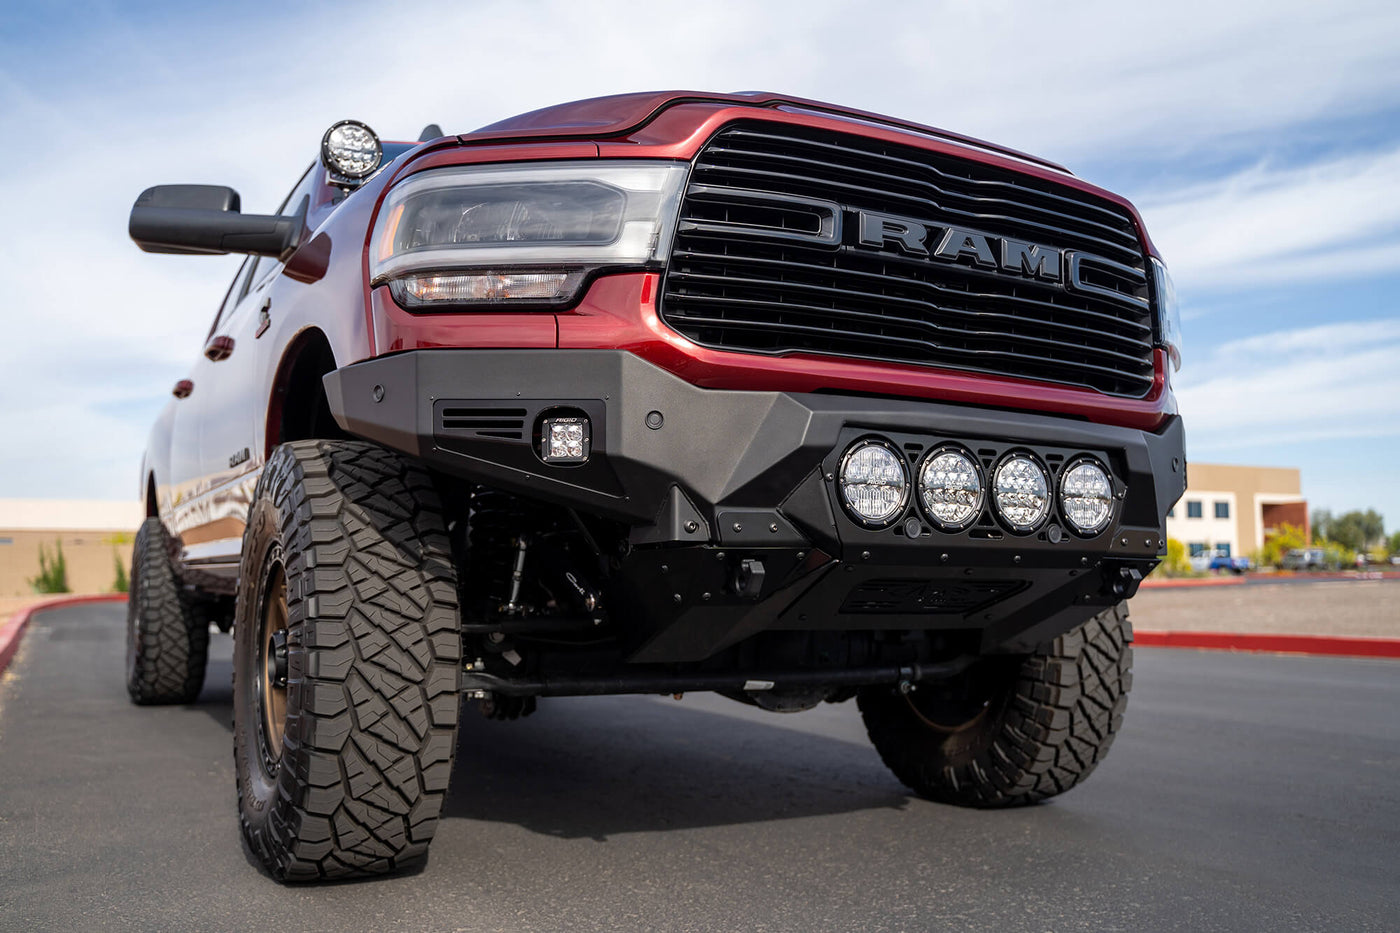 Chevy/Ram/GMC 2500/3500 Full Line of Bomber Front Bumpers are Available!